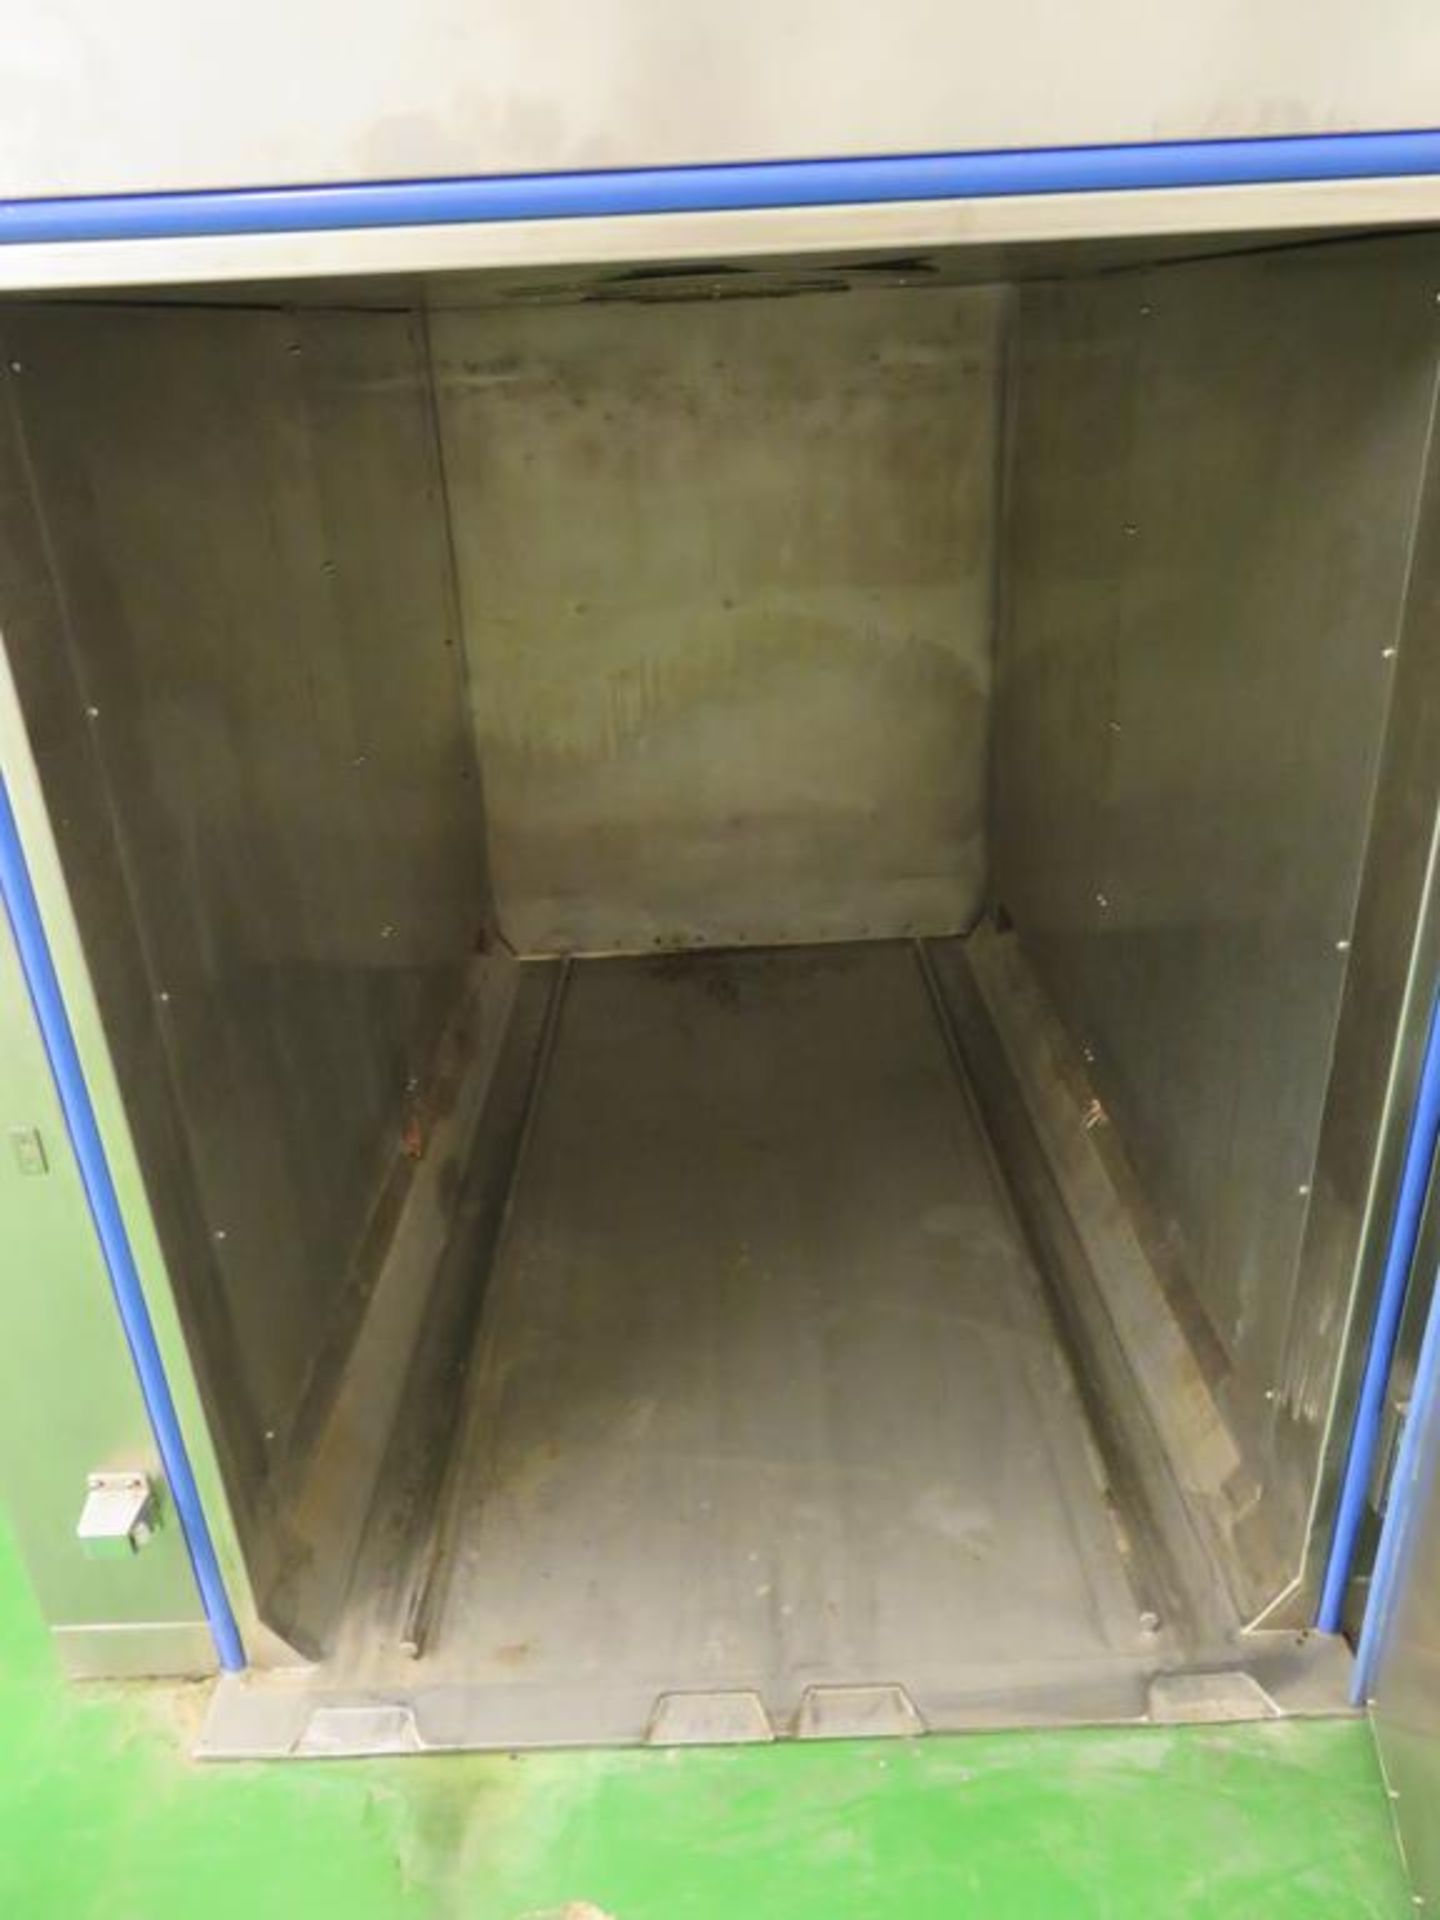 GMC Rapidaire 2400 Steam Oven - Image 2 of 3